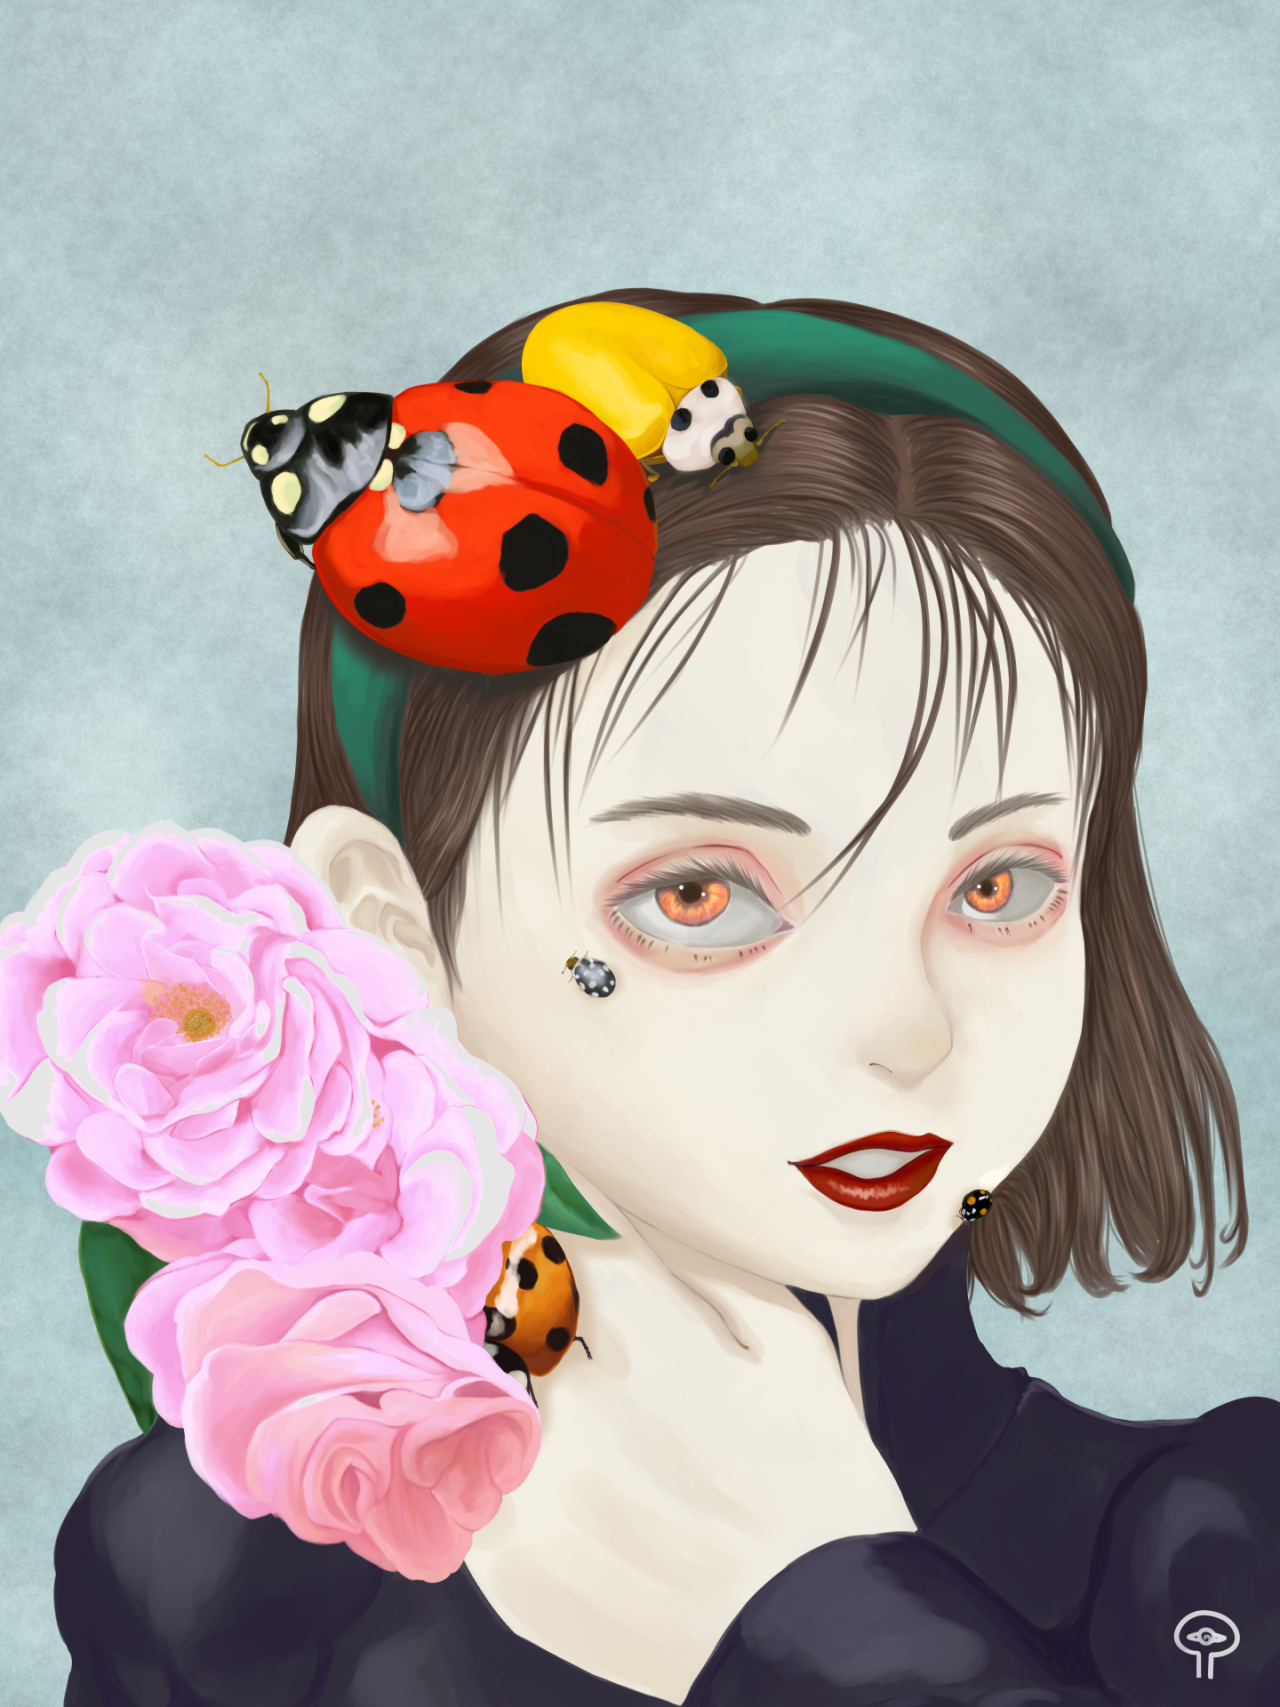 #lady bird#coccinelle#lady#illustration#flowers#insects#dress#art